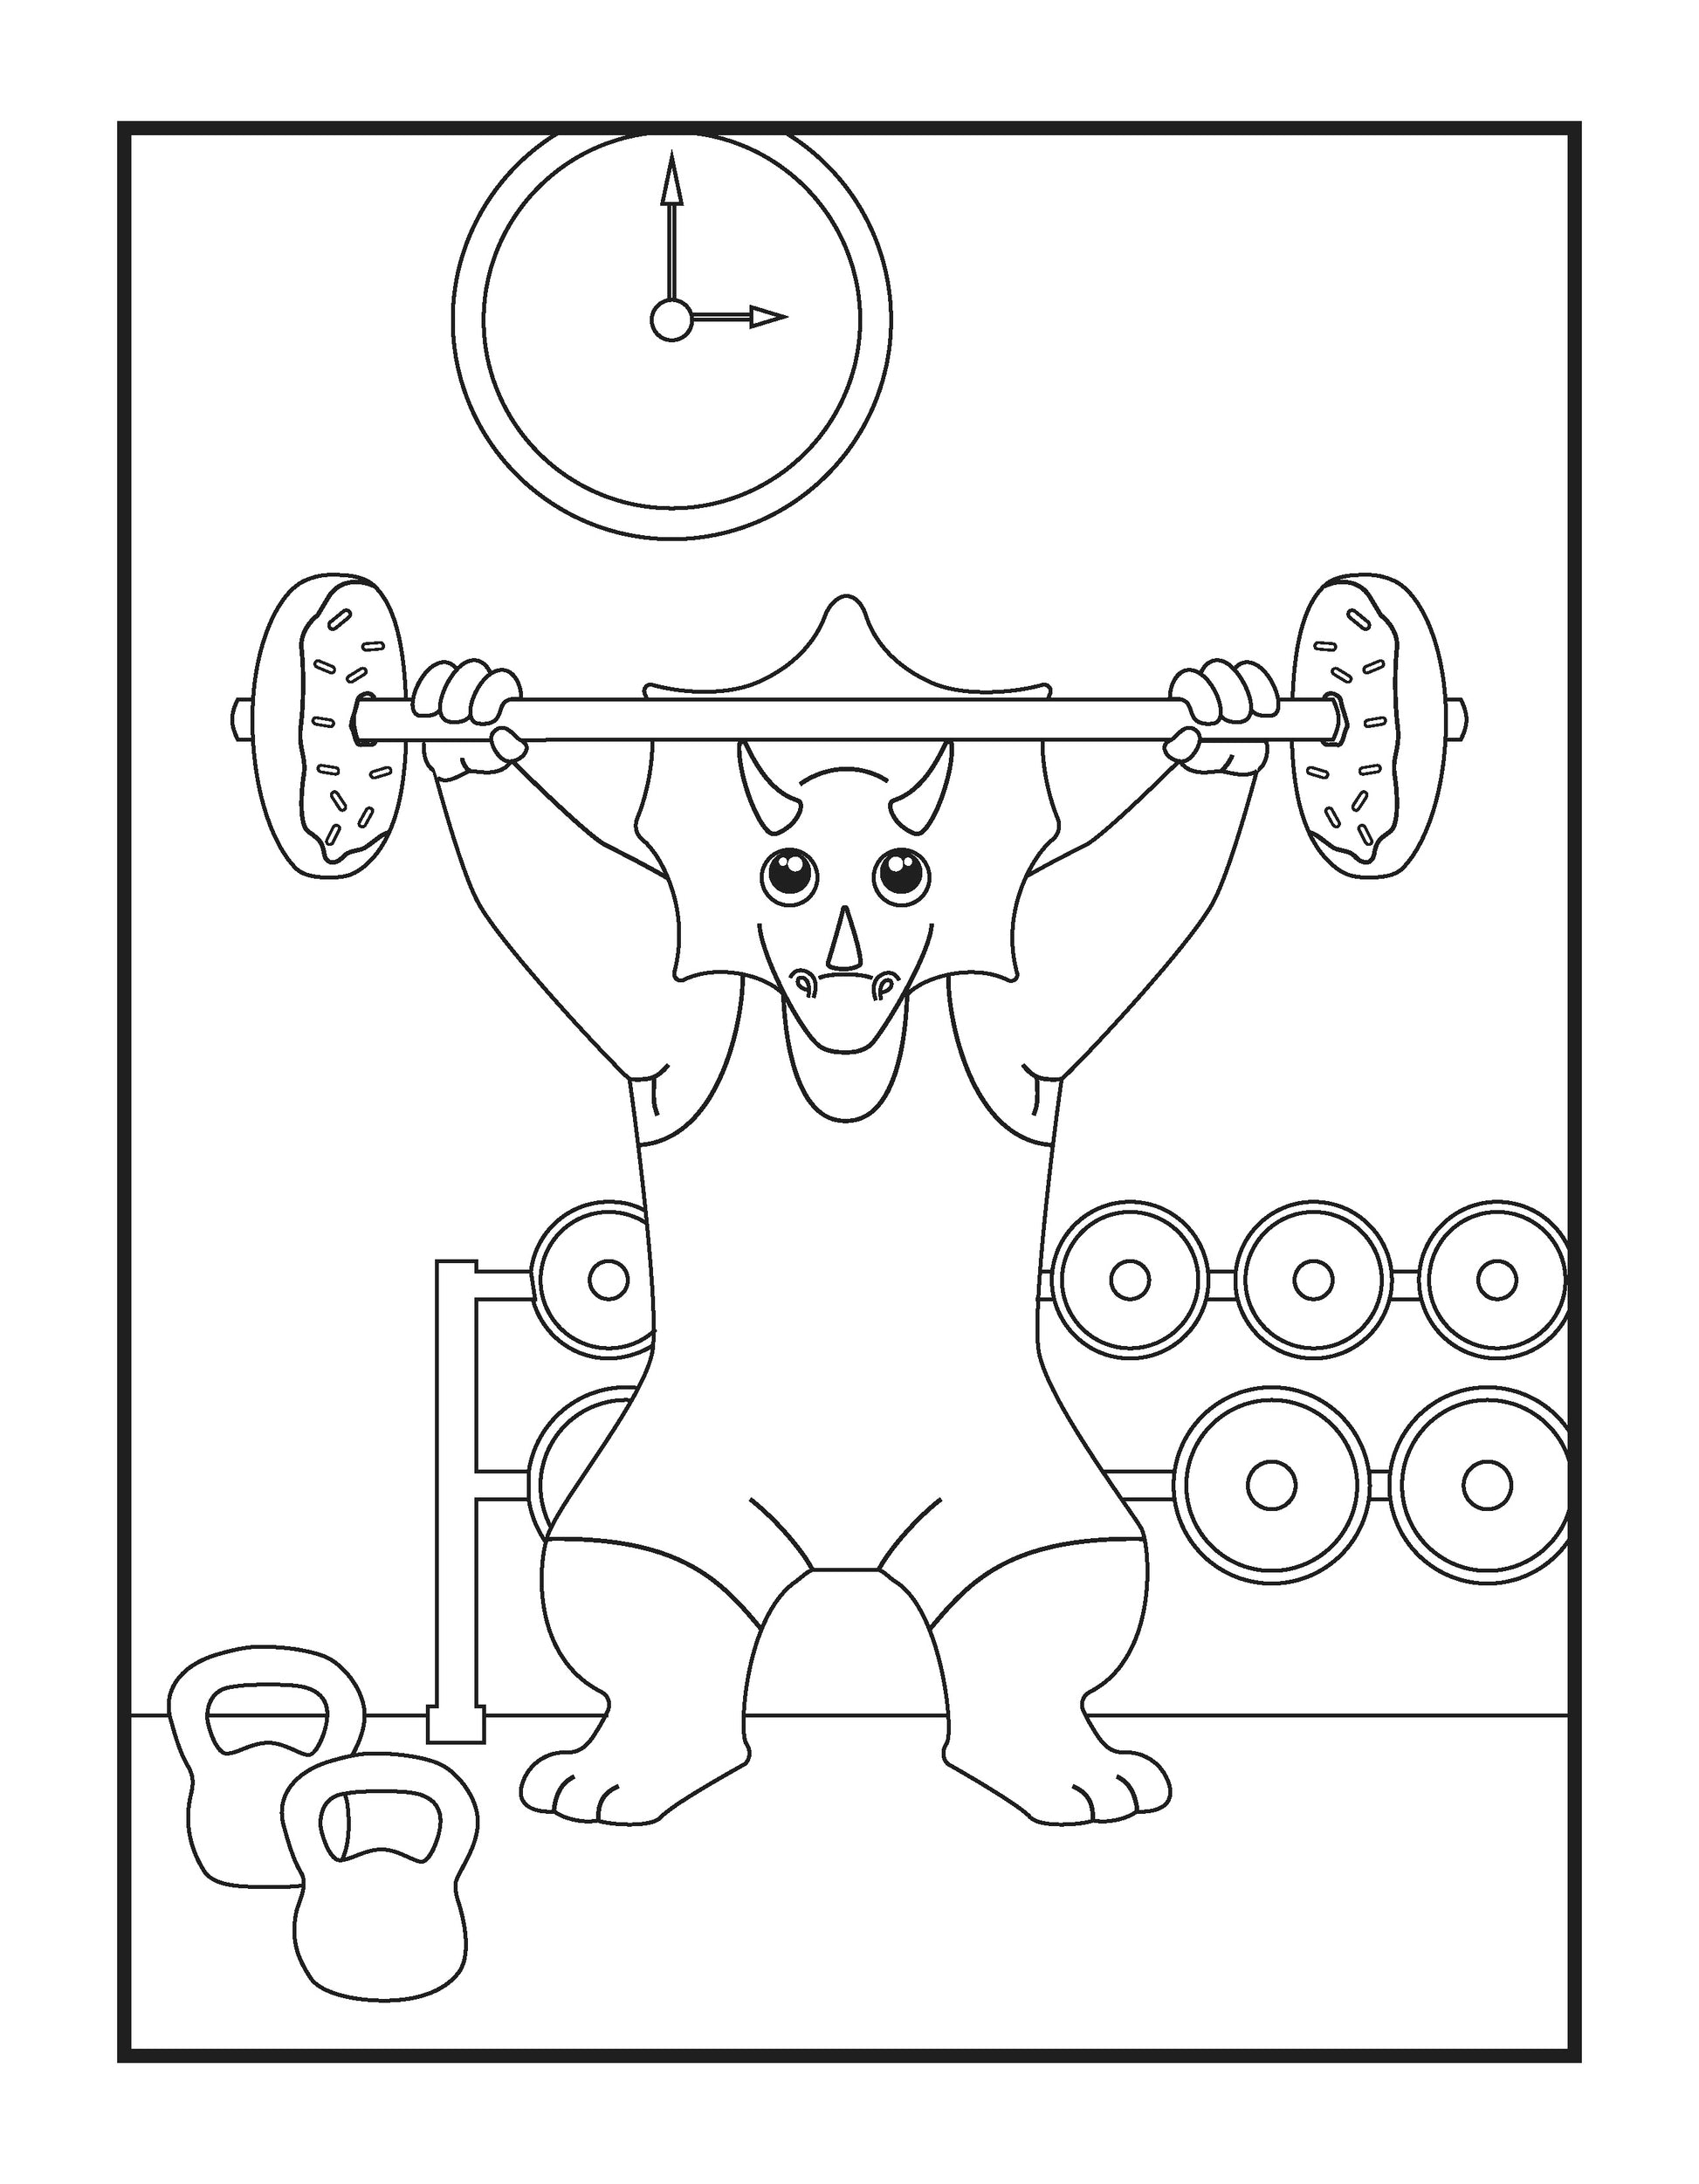  A coloring page shows a cartoon dinosaur lifting a barbell in a gym. The dinosaur stands centered, looking determined, with the barbell loaded with donut-shaped weights. Gym equipment, including kettlebells, is scattered around, and a clock on the wall indicates it's exercise time. The scene is contained within a simple border, giving it a clean look that invites children to add color and personal touches while engaging with themes of fitness and fun.